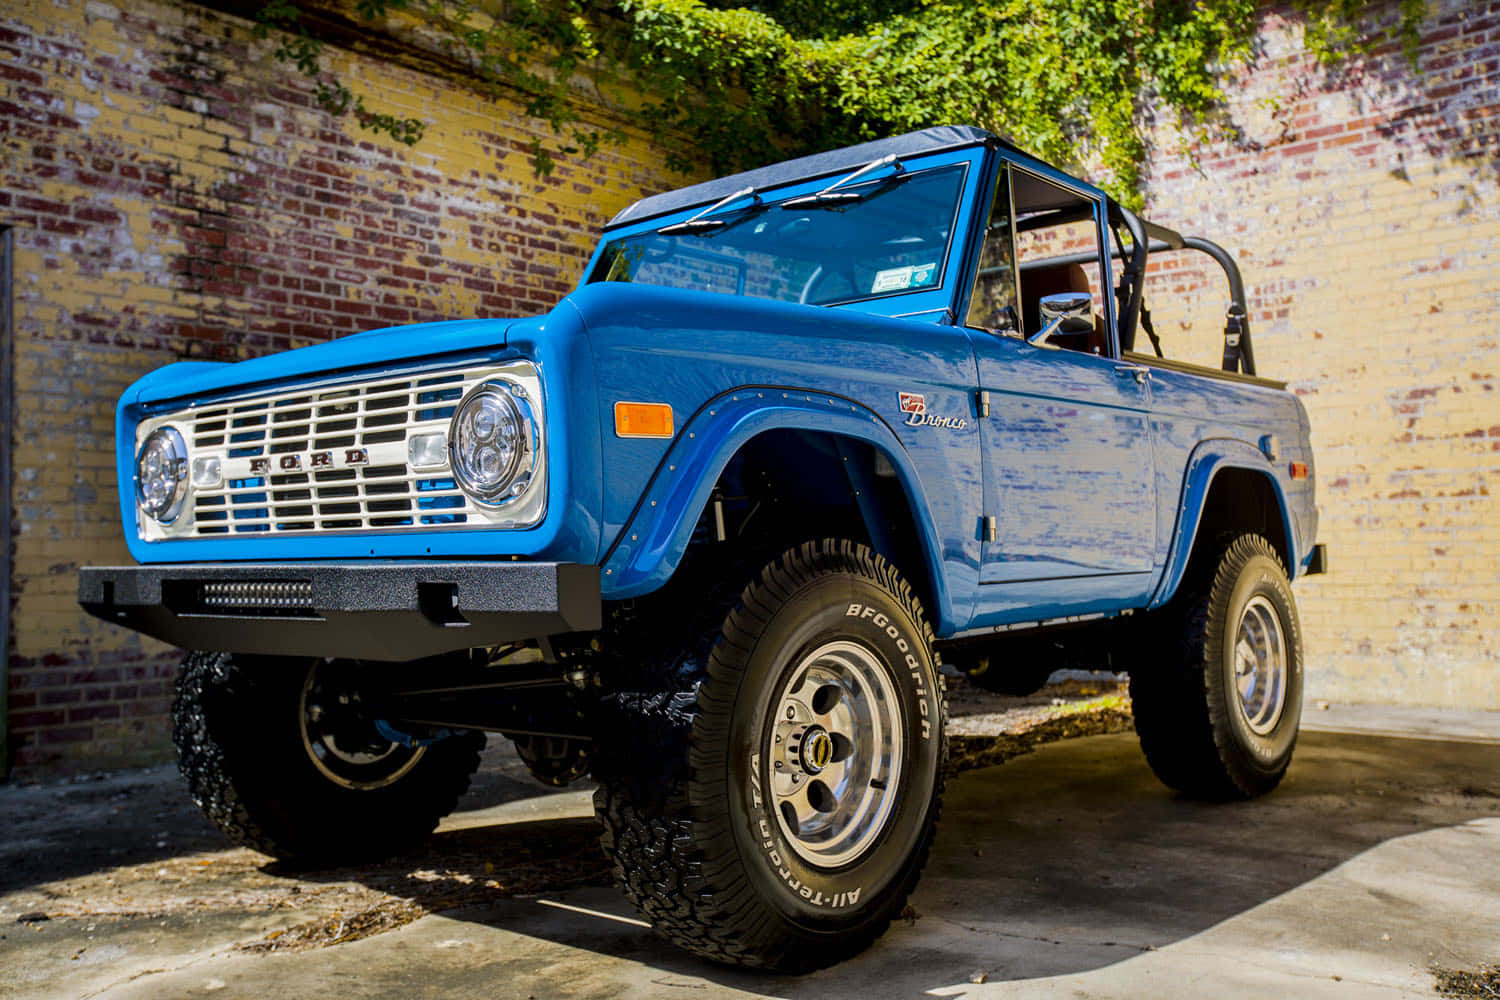 Get Out&Explore in your Ford Bronco